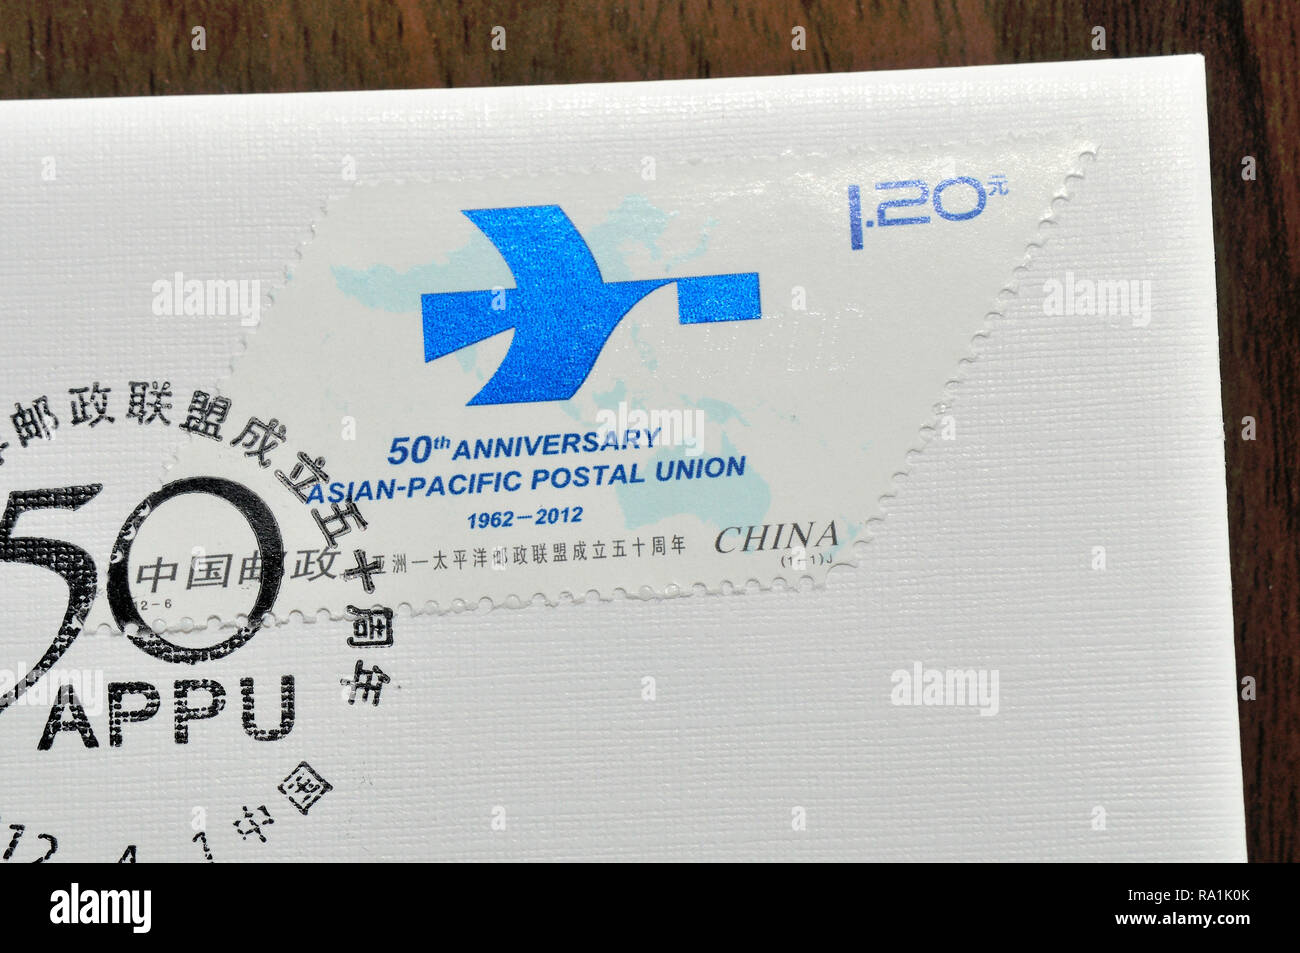 CHINA - CIRCA 2012: A stamps printed in China shows 2012-6 50th Anniversary of Asian-Pacific Postal Union circa 2012. Stock Photo